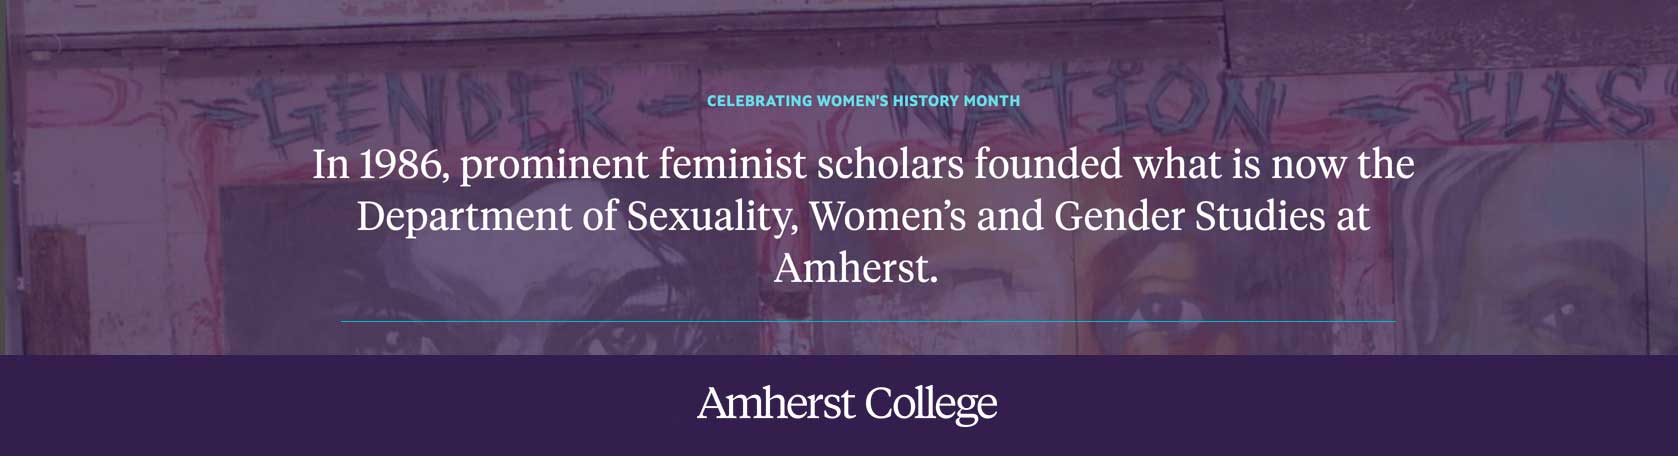 In 1986, the Sexuality, Women's and Gender Studies department was founded